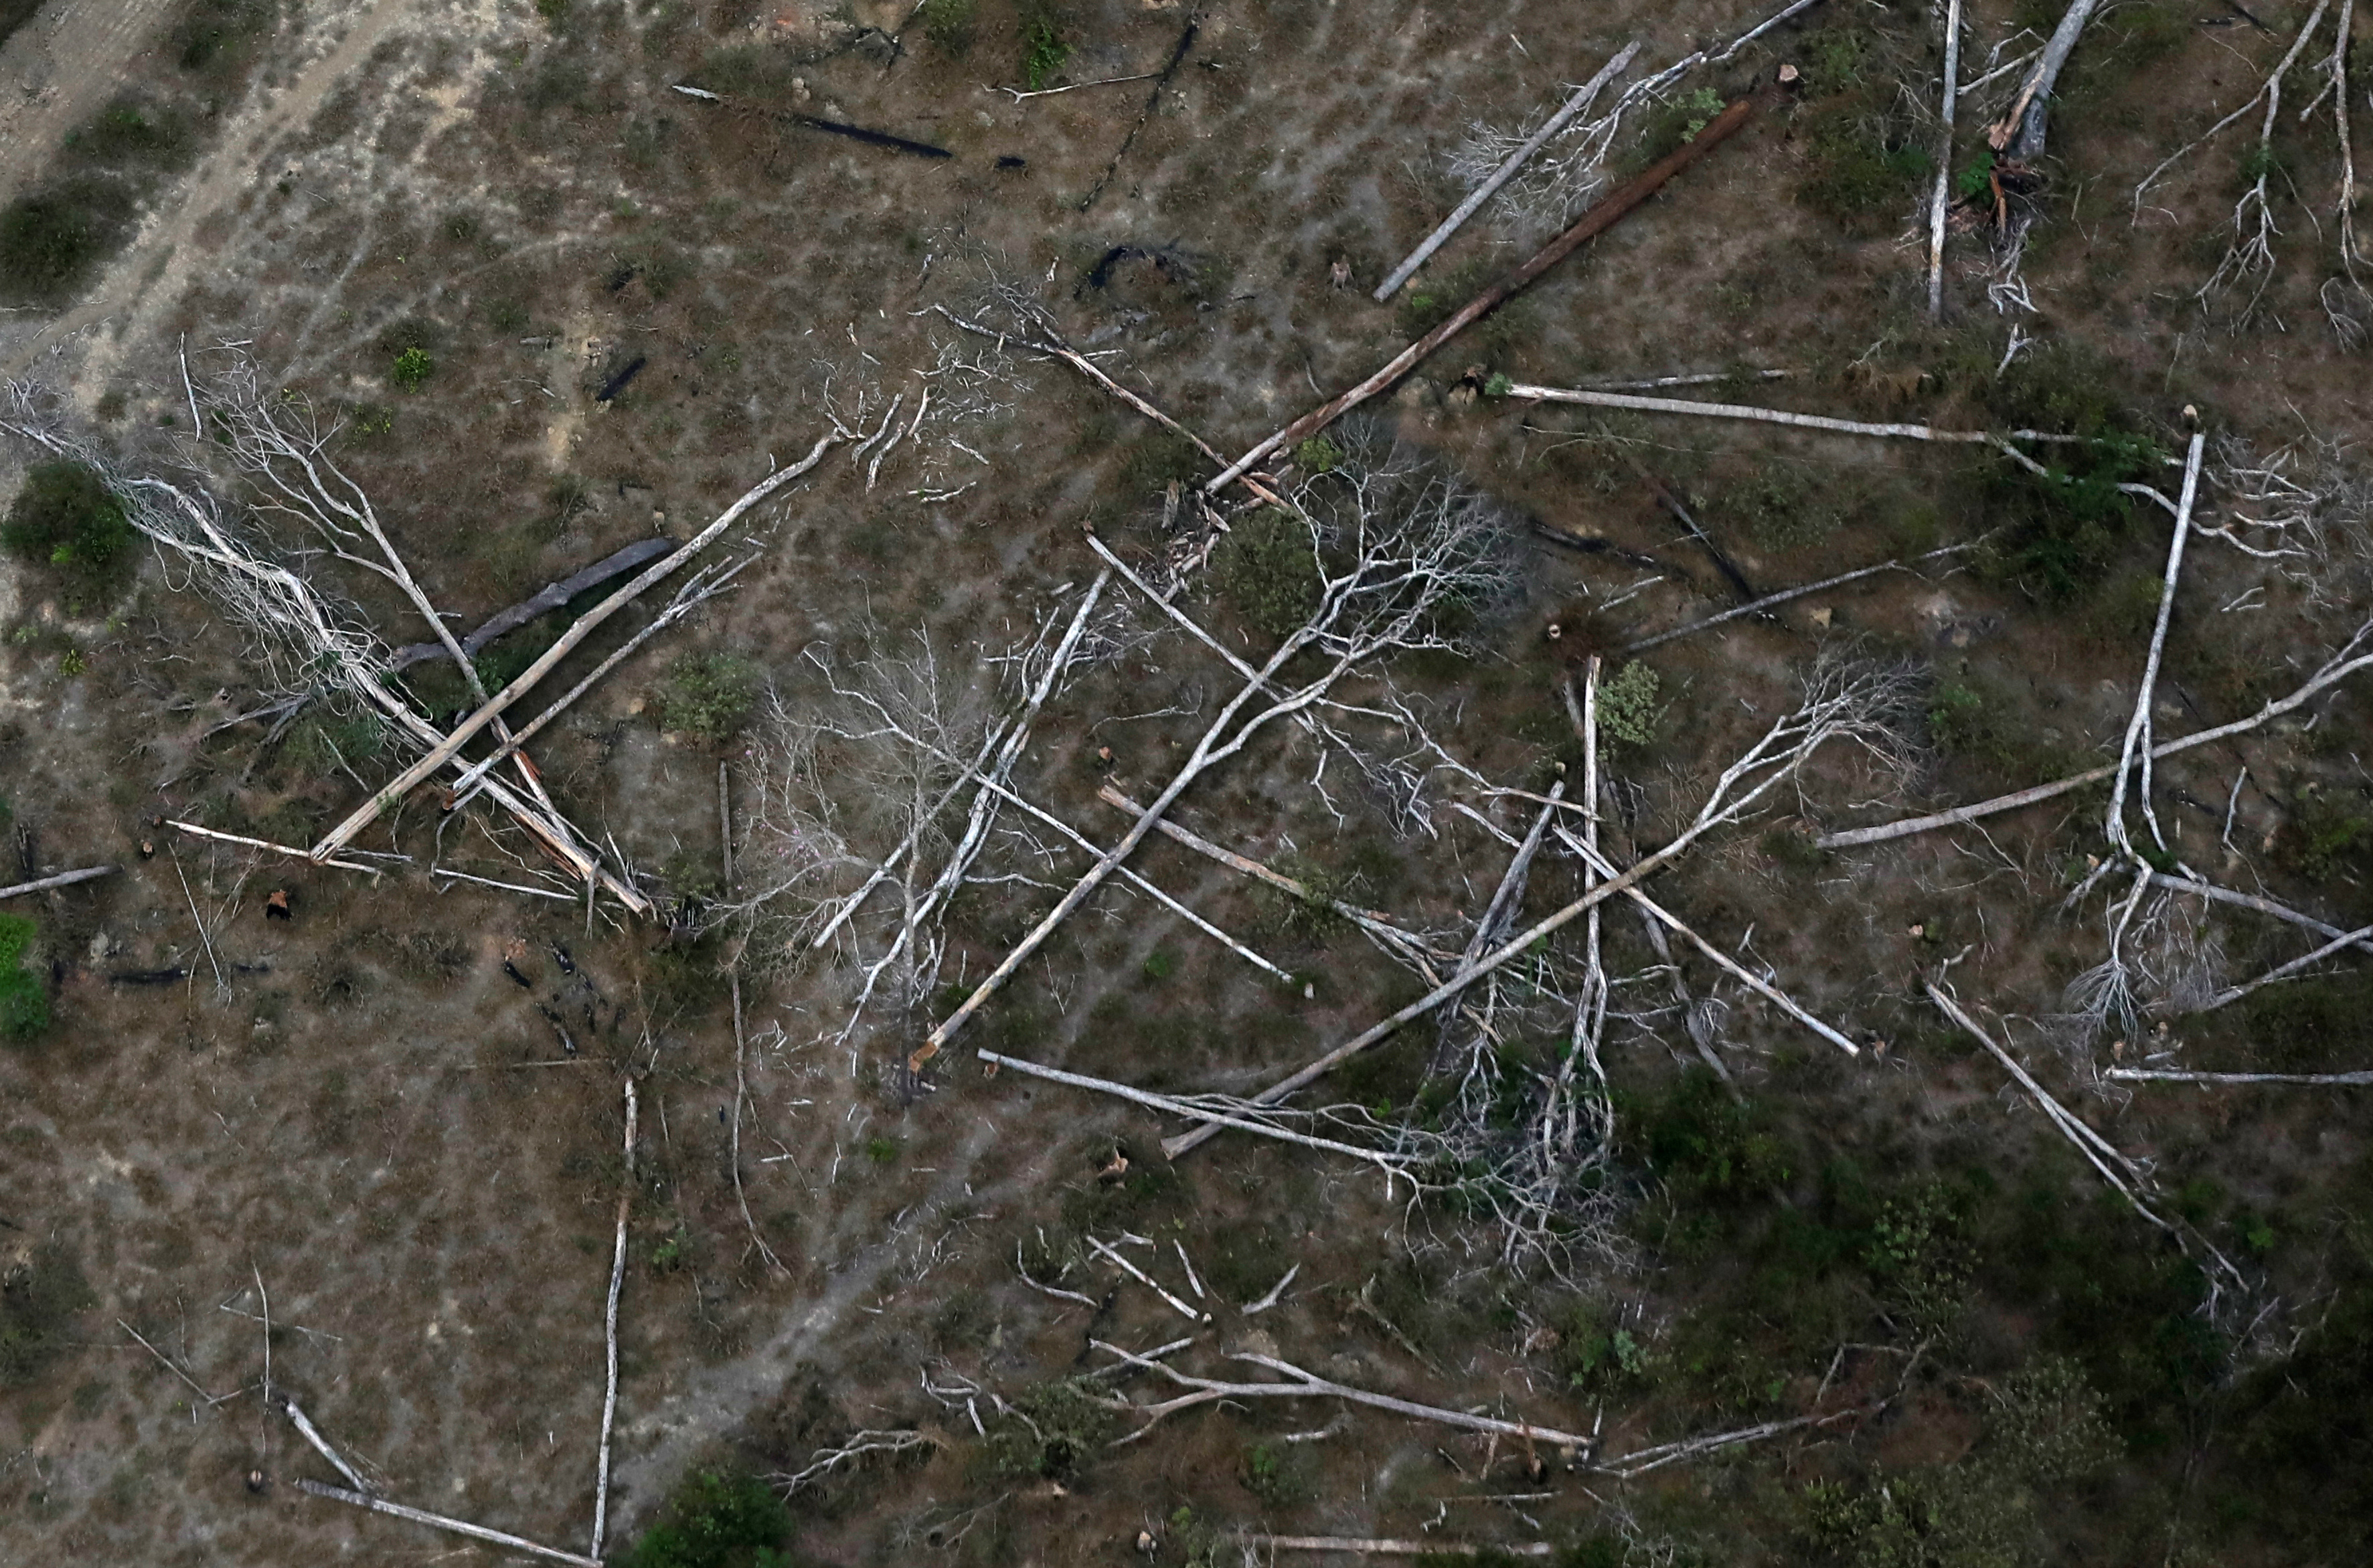 An aerial view shows a deforested plot of the Amazon near Porto Velho